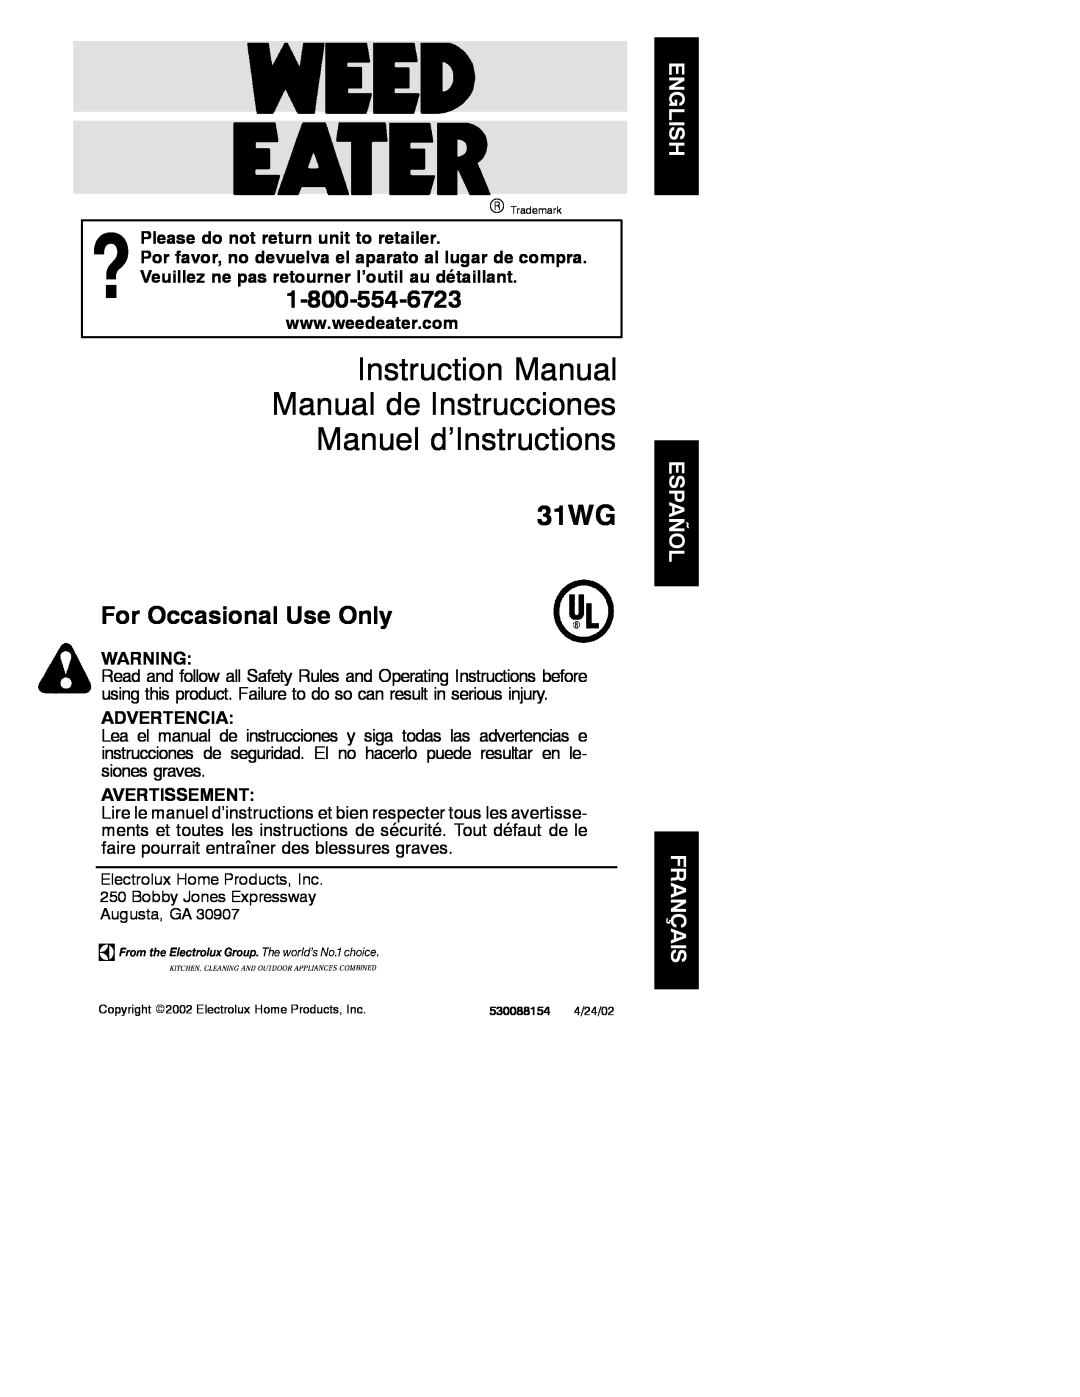 Weed Eater 530088154 instruction manual Please do not return unit to retailer, Advertencia, Avertissement, 31WG 